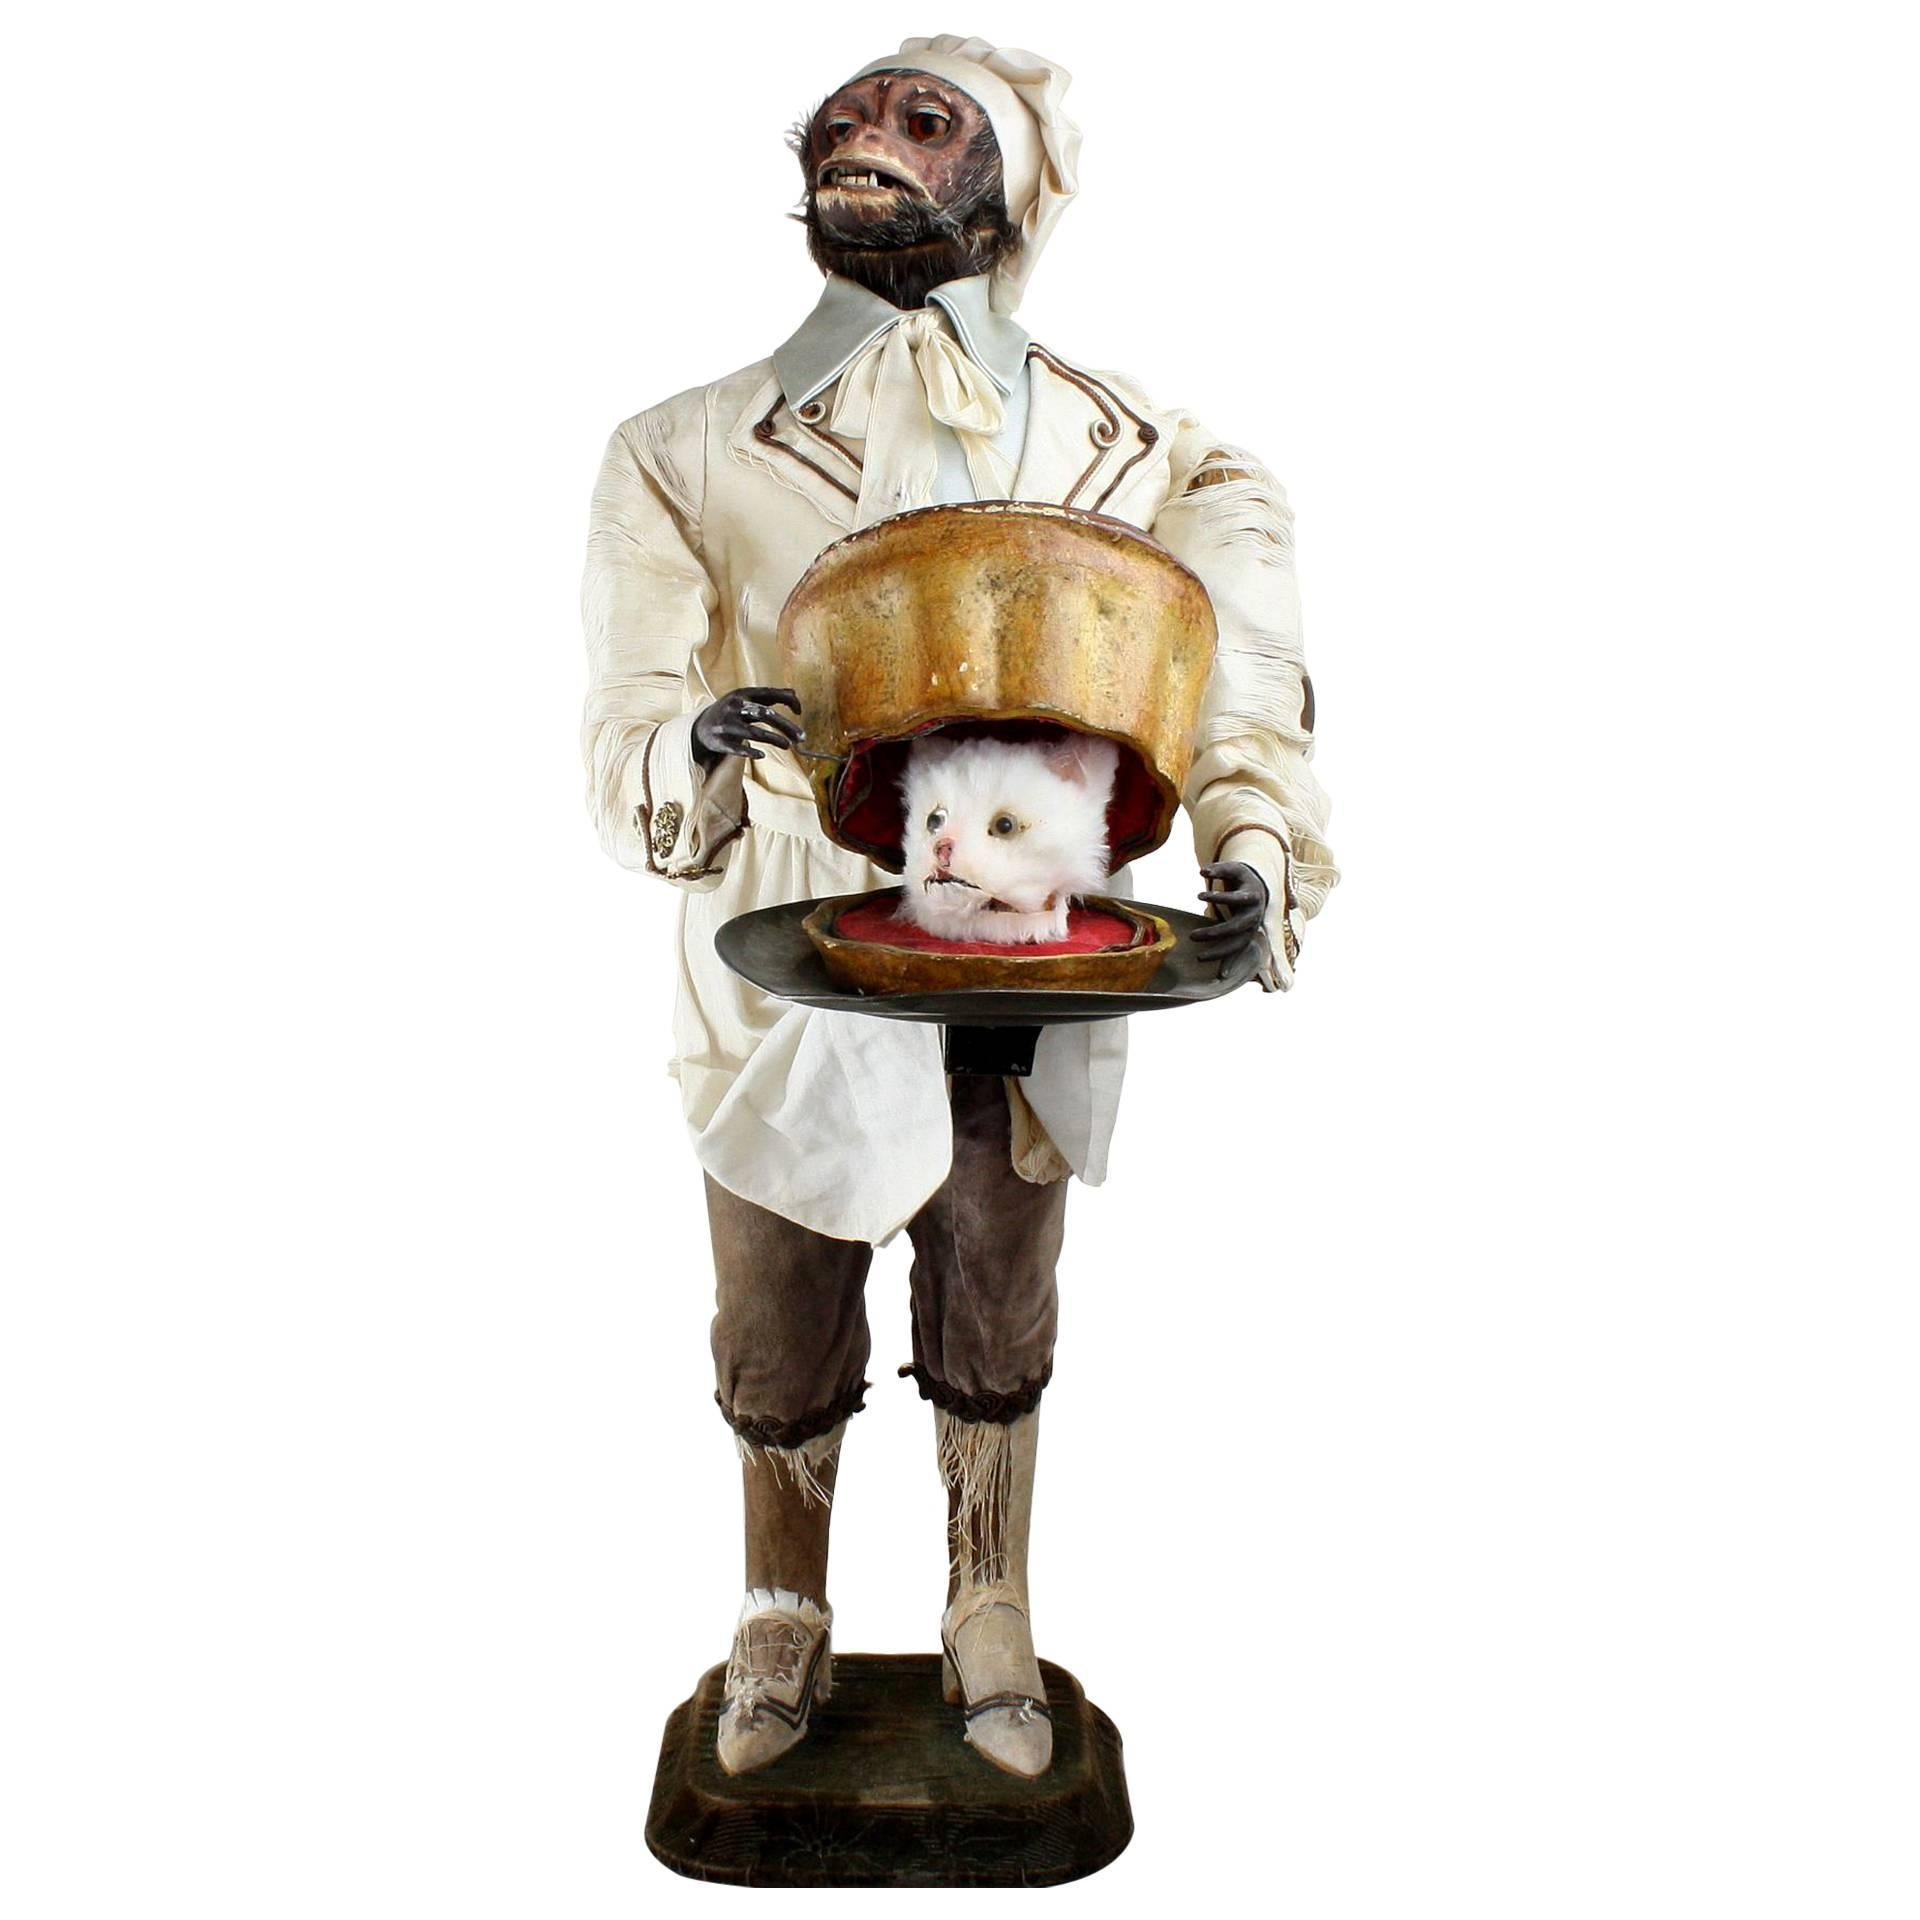 Antique Monkey Pastry-Cook Musical Automaton, by Roullet & Decamps